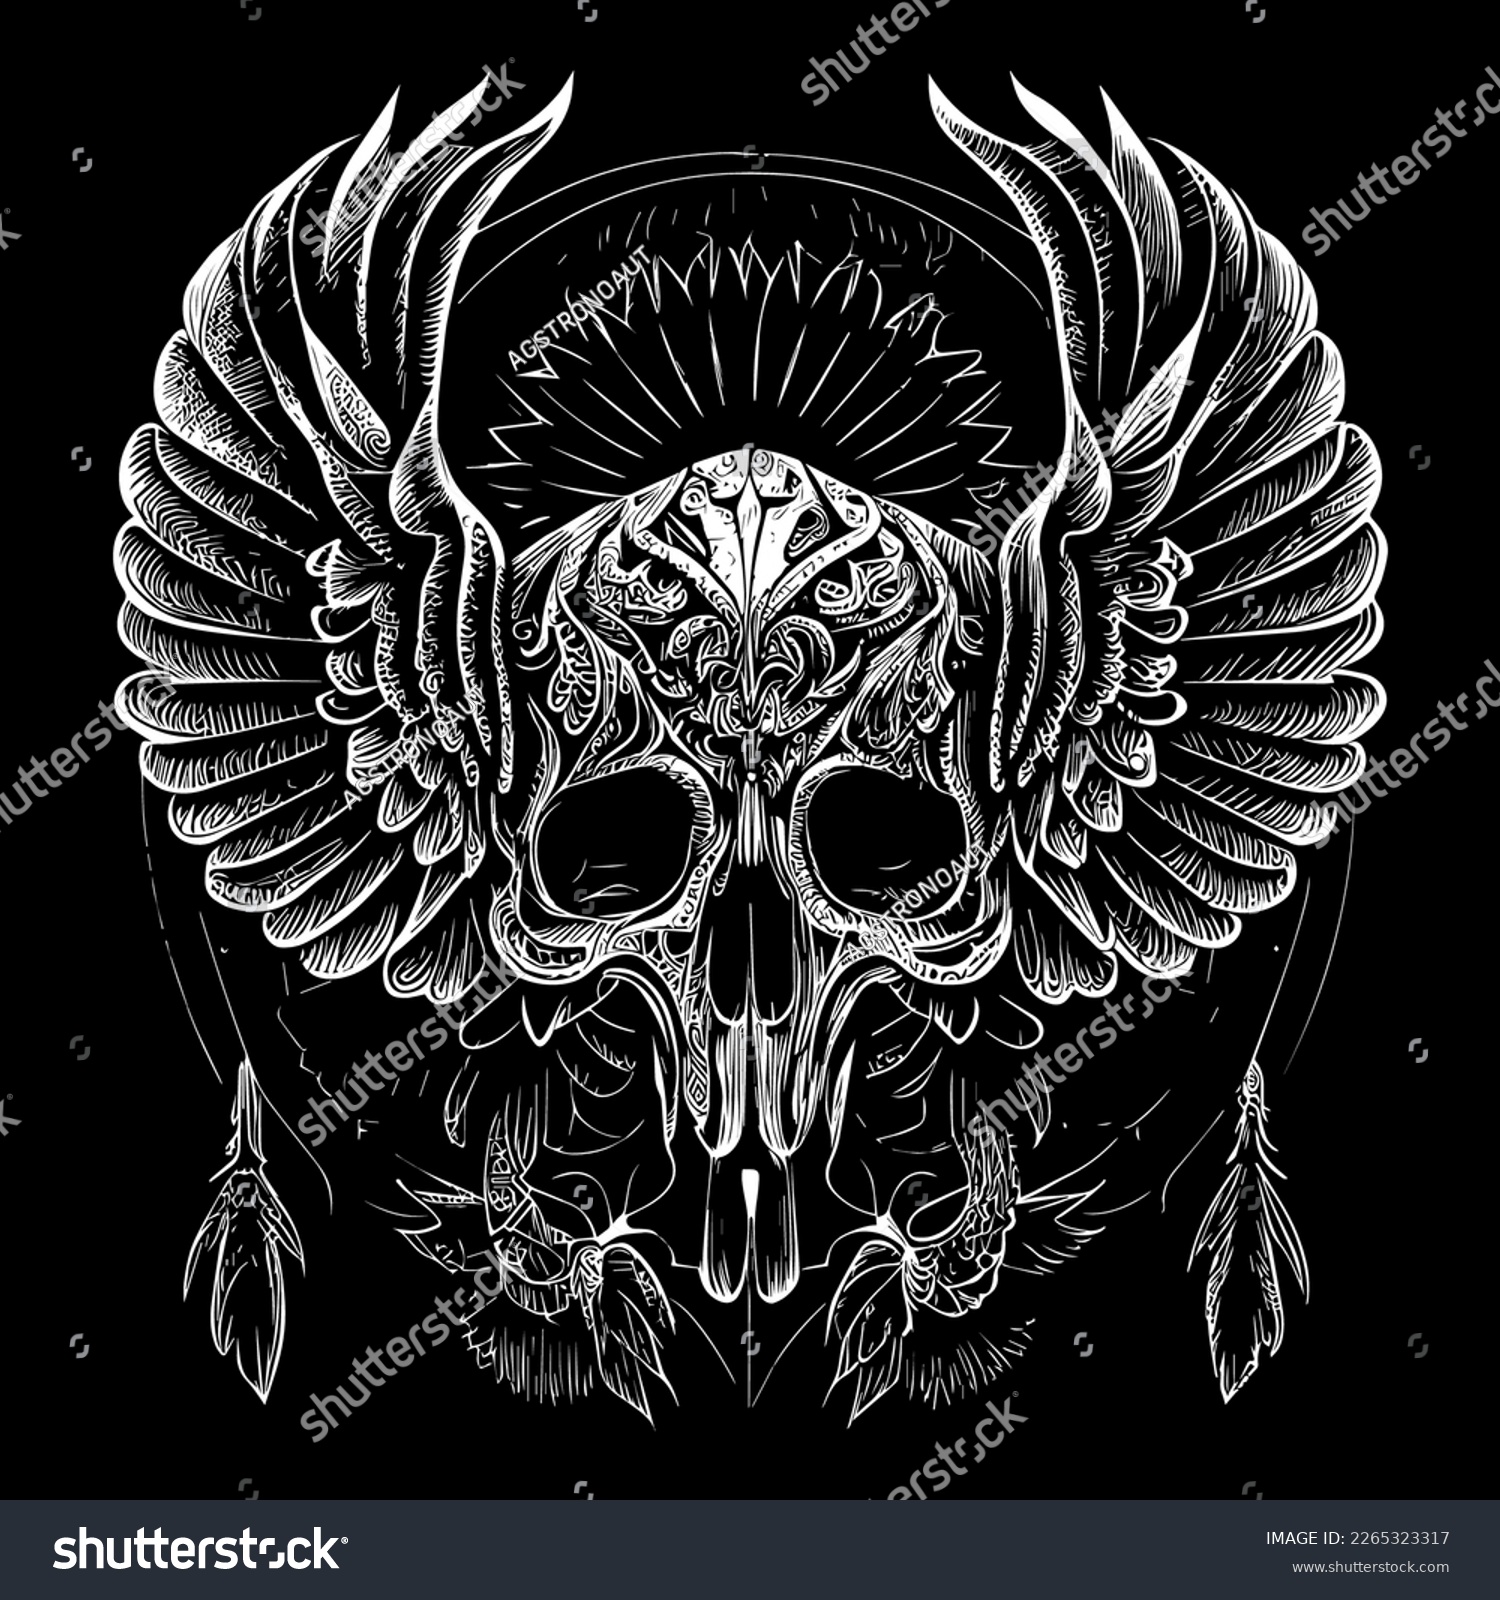 SVG of This illustration depicts a skull head with intricately detailed feathers extending into wings. The juxtaposition of death and life creates a hauntingly beautiful image svg